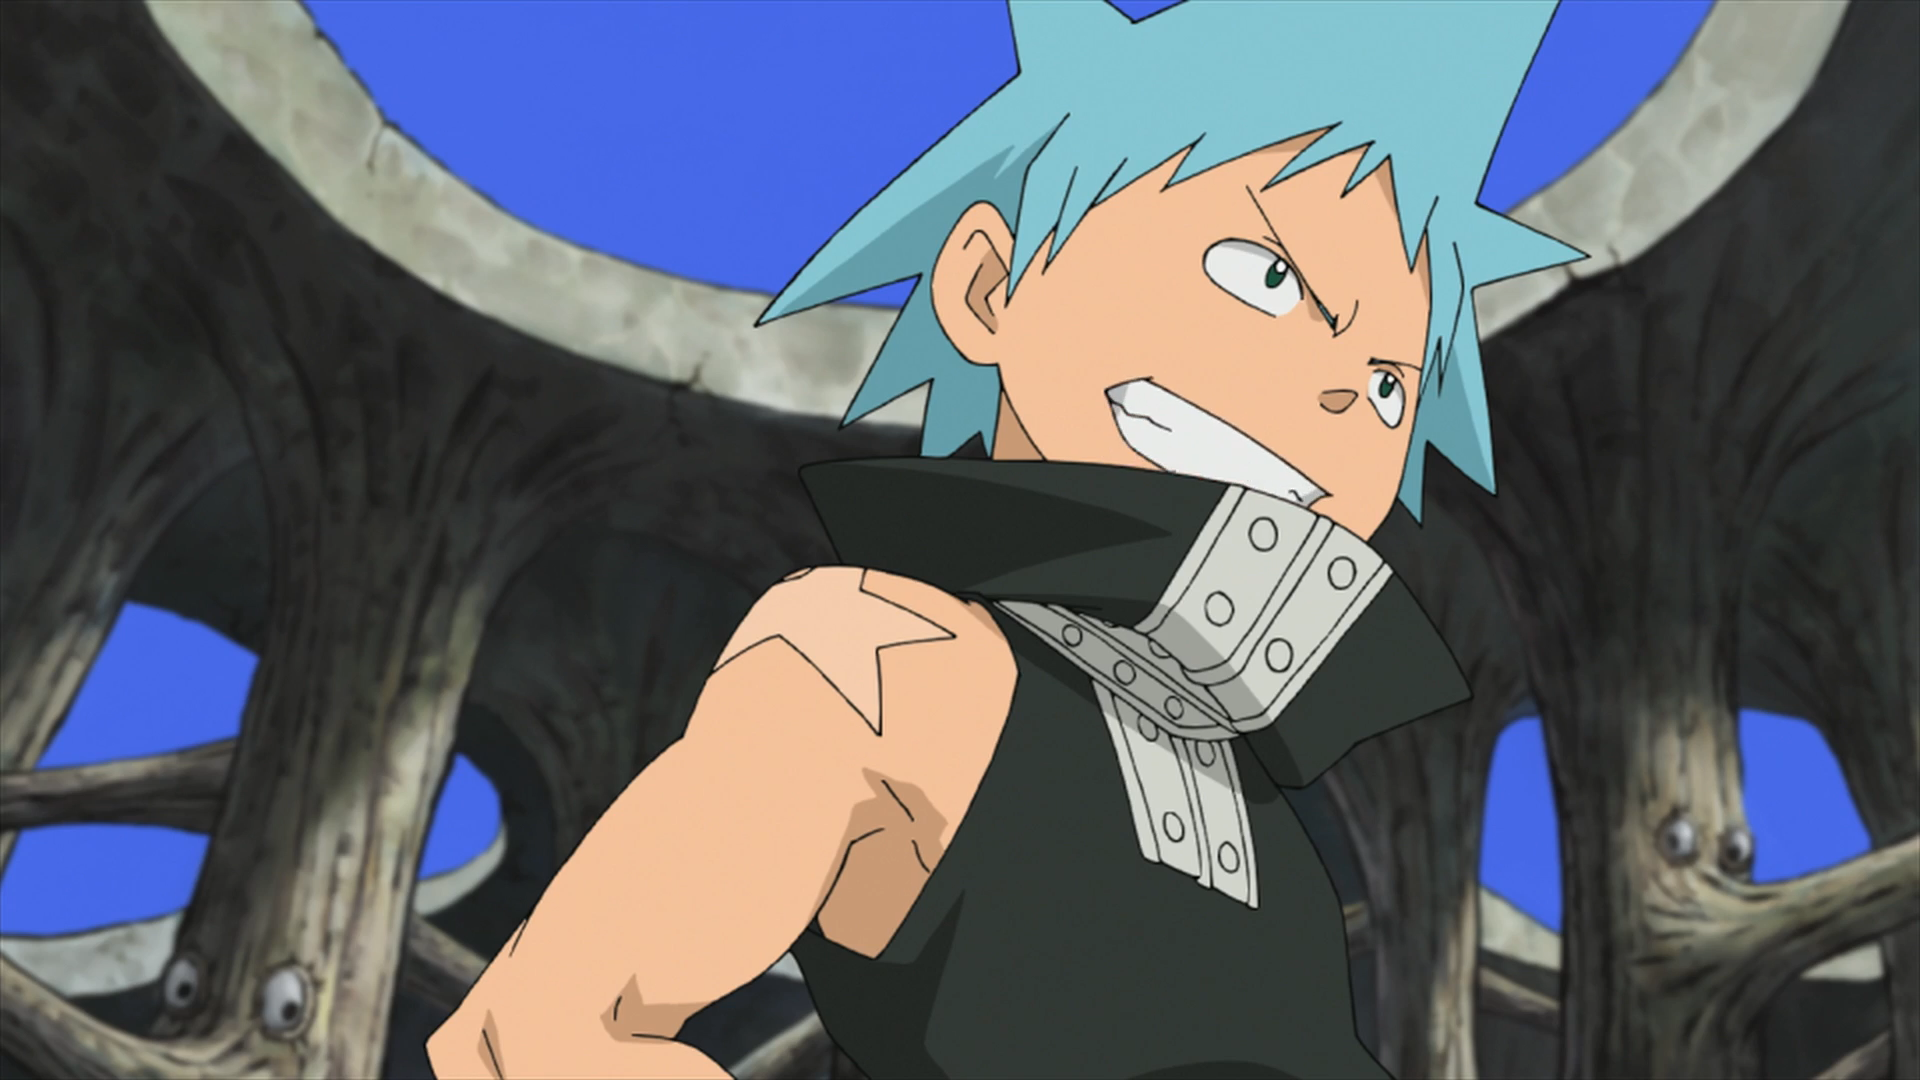 Yahiro Wasnt Born In Suna Shown By His Name And Appearance  Soul Eater  Black Star Older  Free Transparent PNG Download  PNGkey